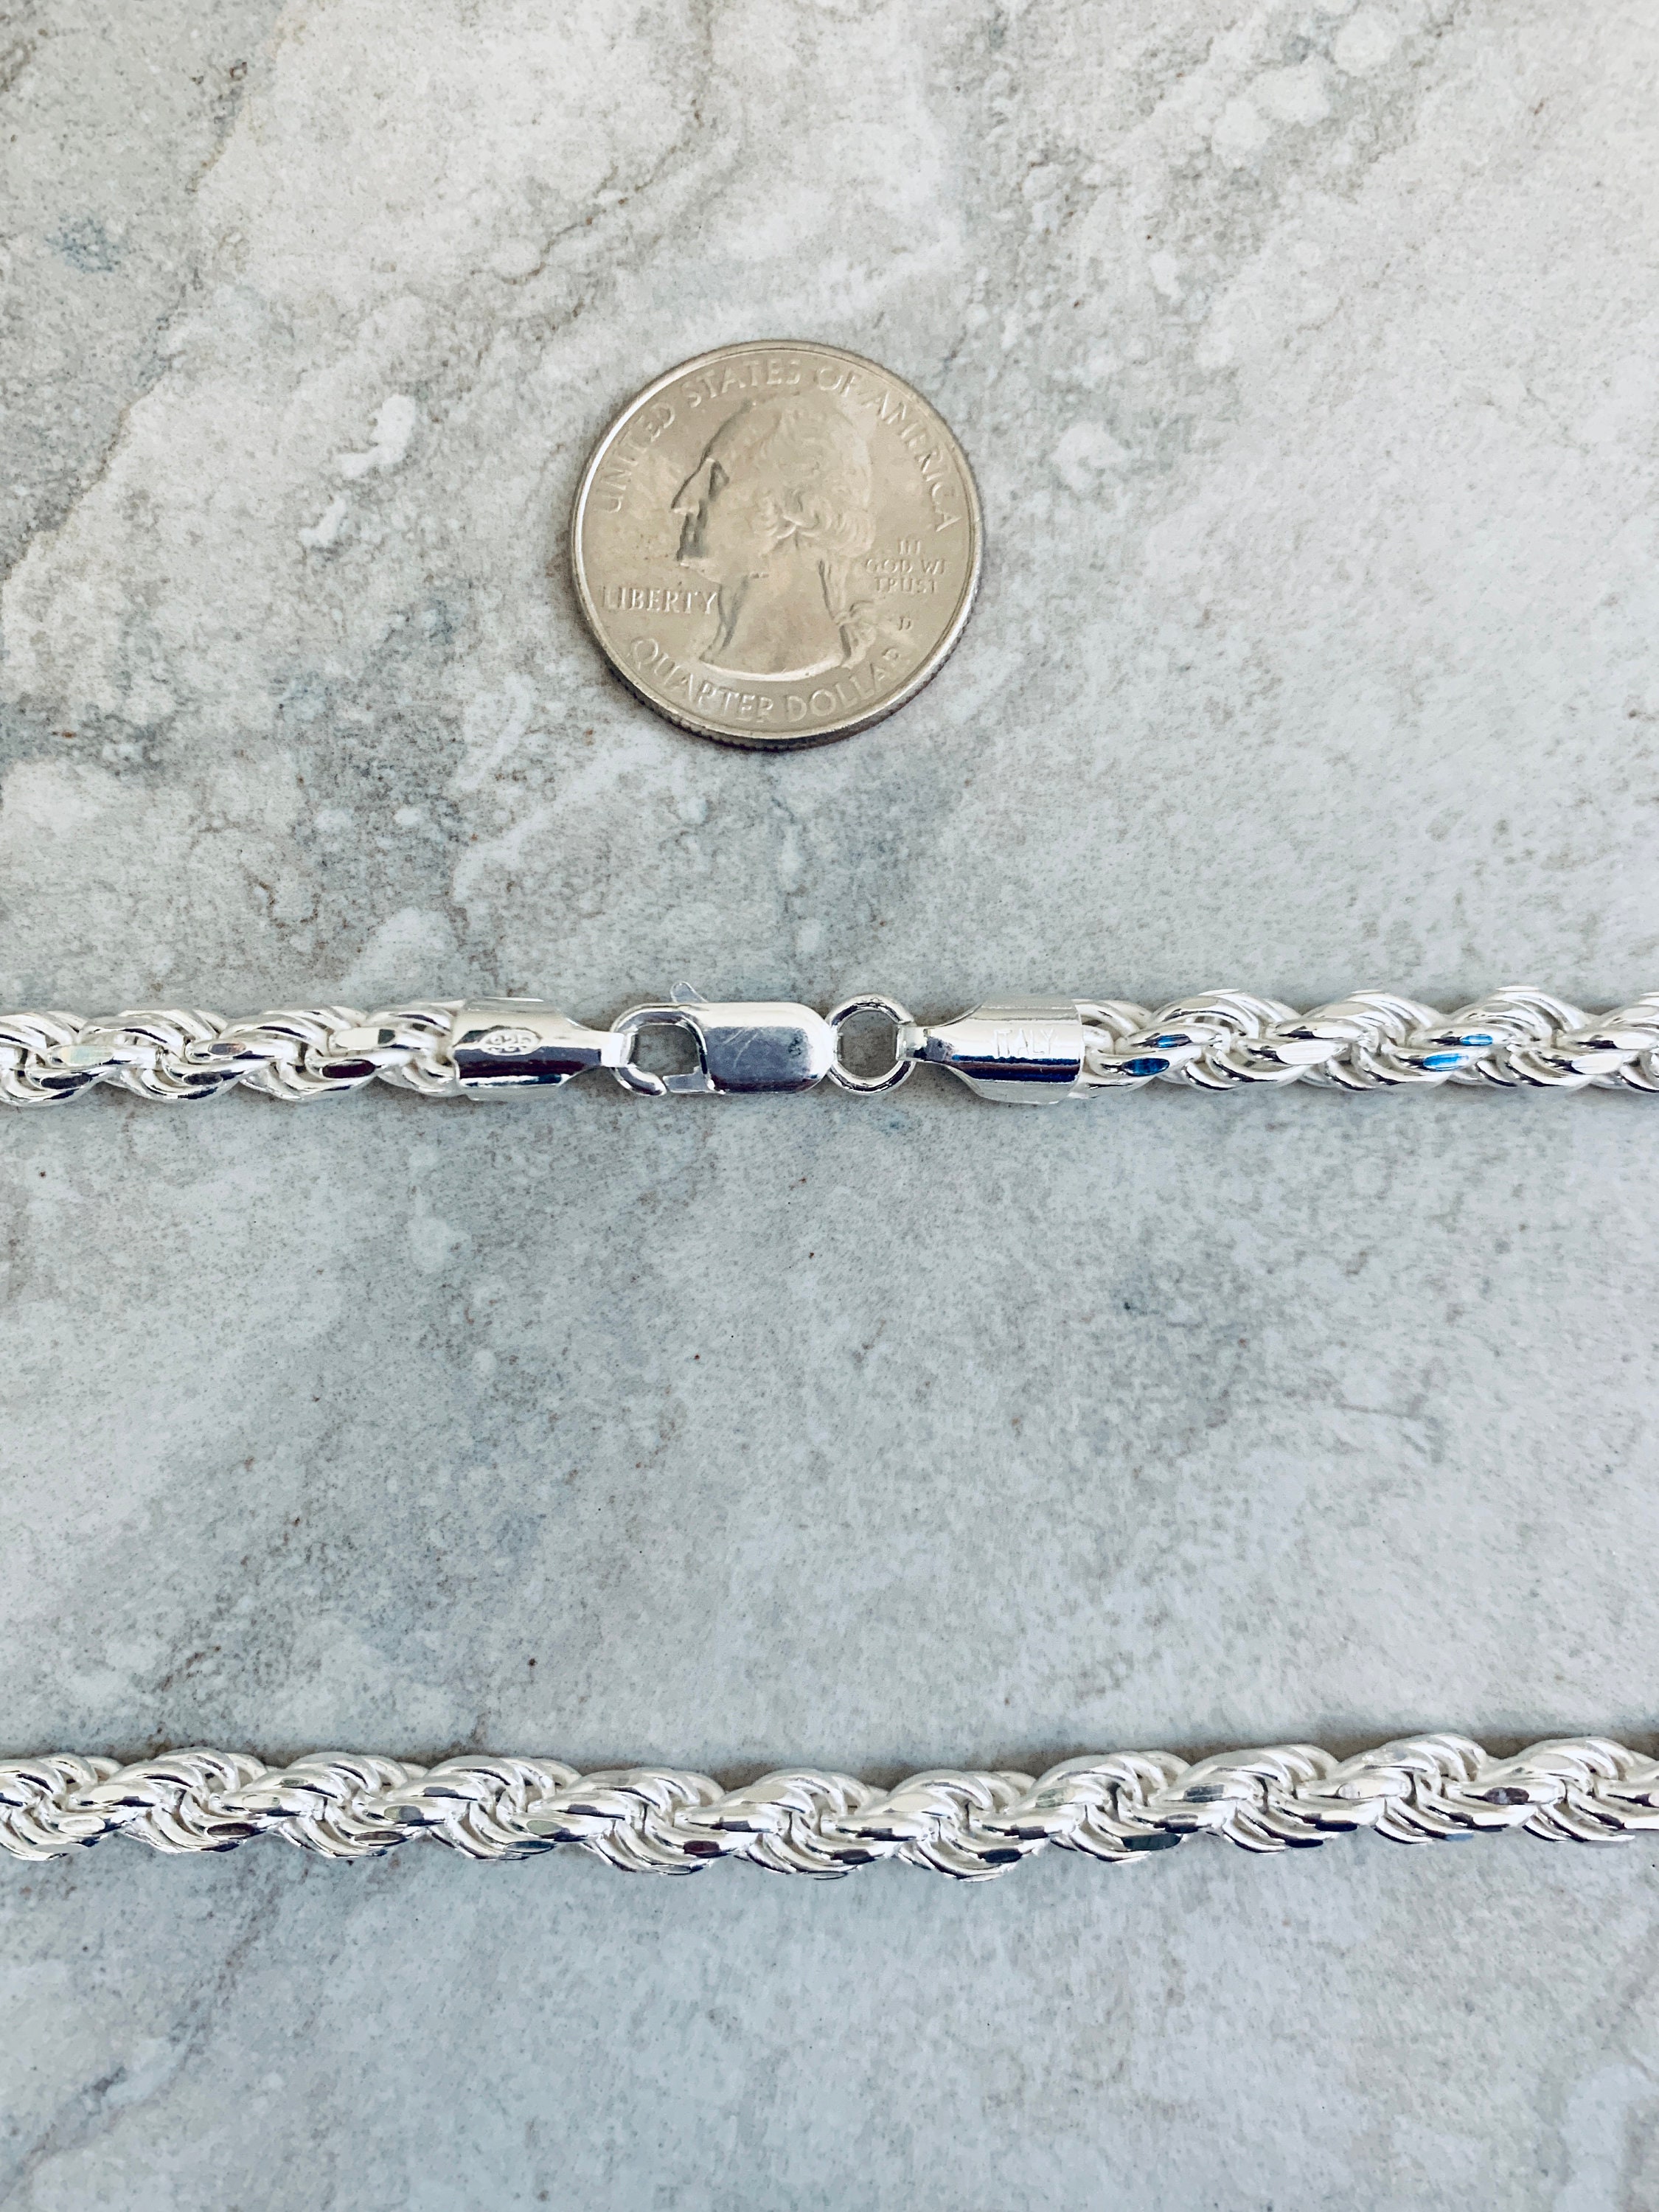 Homxi Punk Necklace Chain,Necklace Chains 6mm Pendant Necklace 20 inch  Chain Twisted Rope Chain Mens Silver Chain Necklaces Sterling Silver Silver